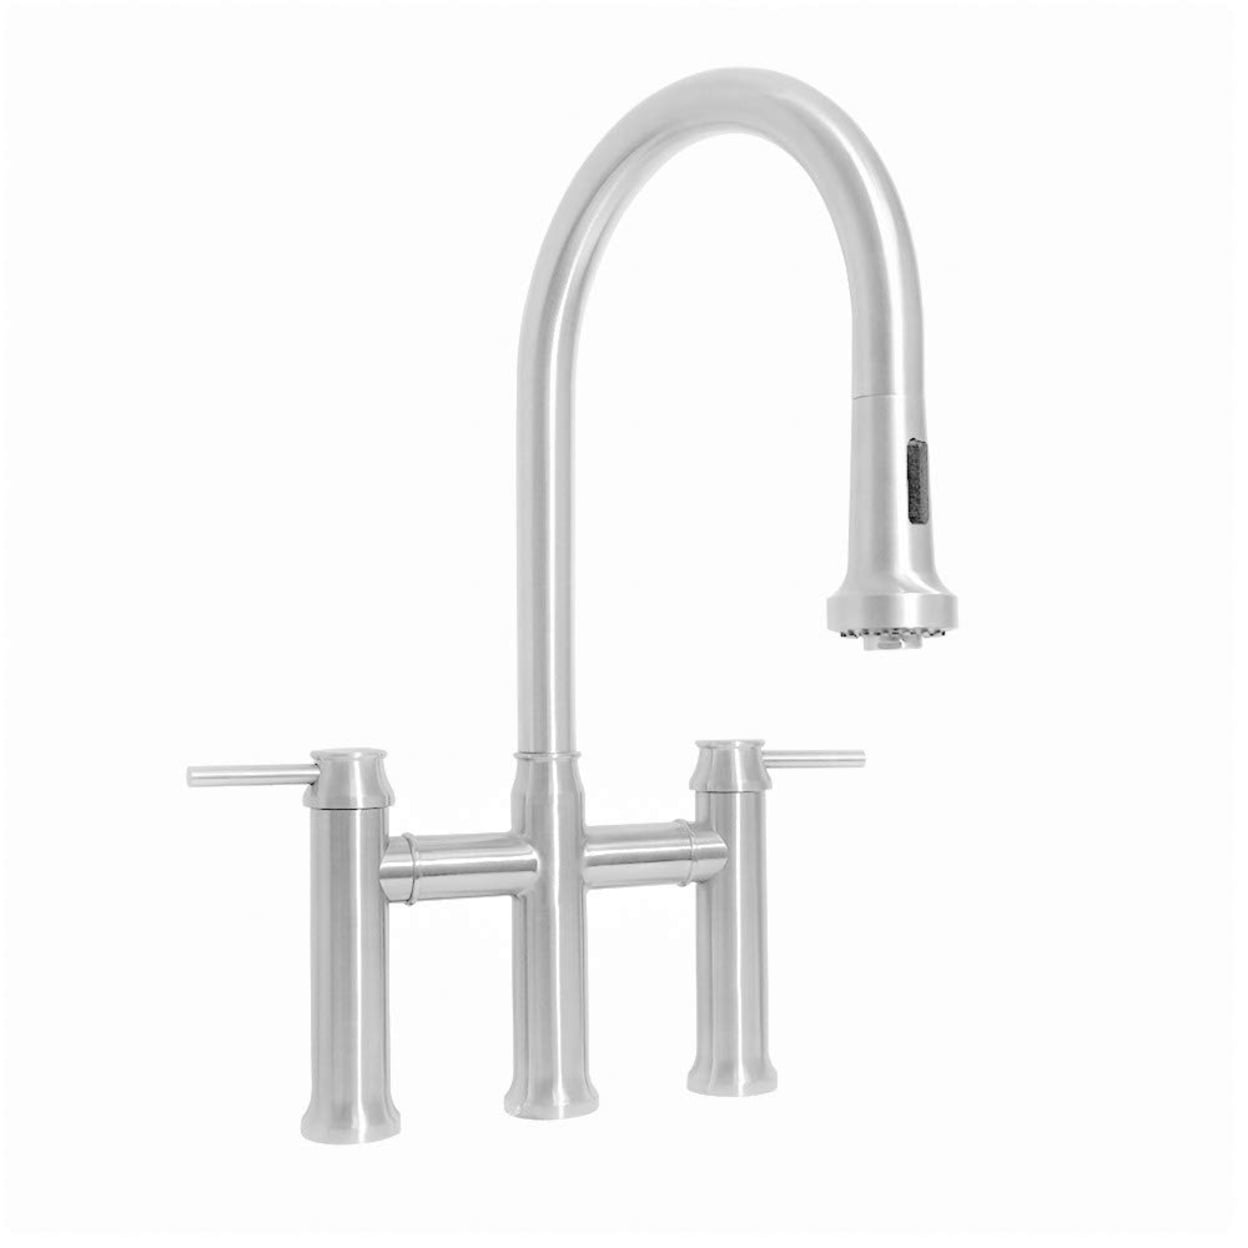 Whs6900-pdk-pss Waterhaus Lead-free Solid Stainless Steel Bridge Faucet With A Gooseneck Swivel Spout - Polished Stainless Steel